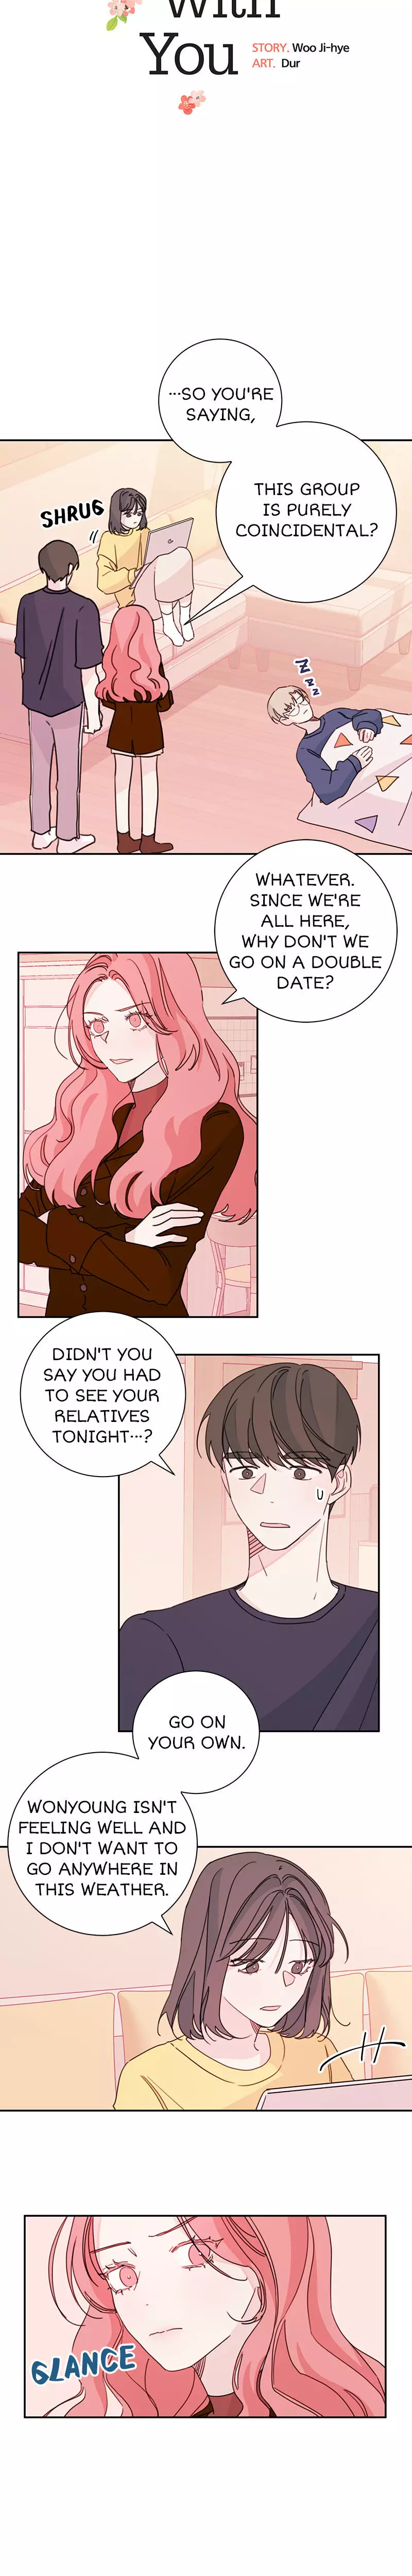 Today Living With You - 26 page 2